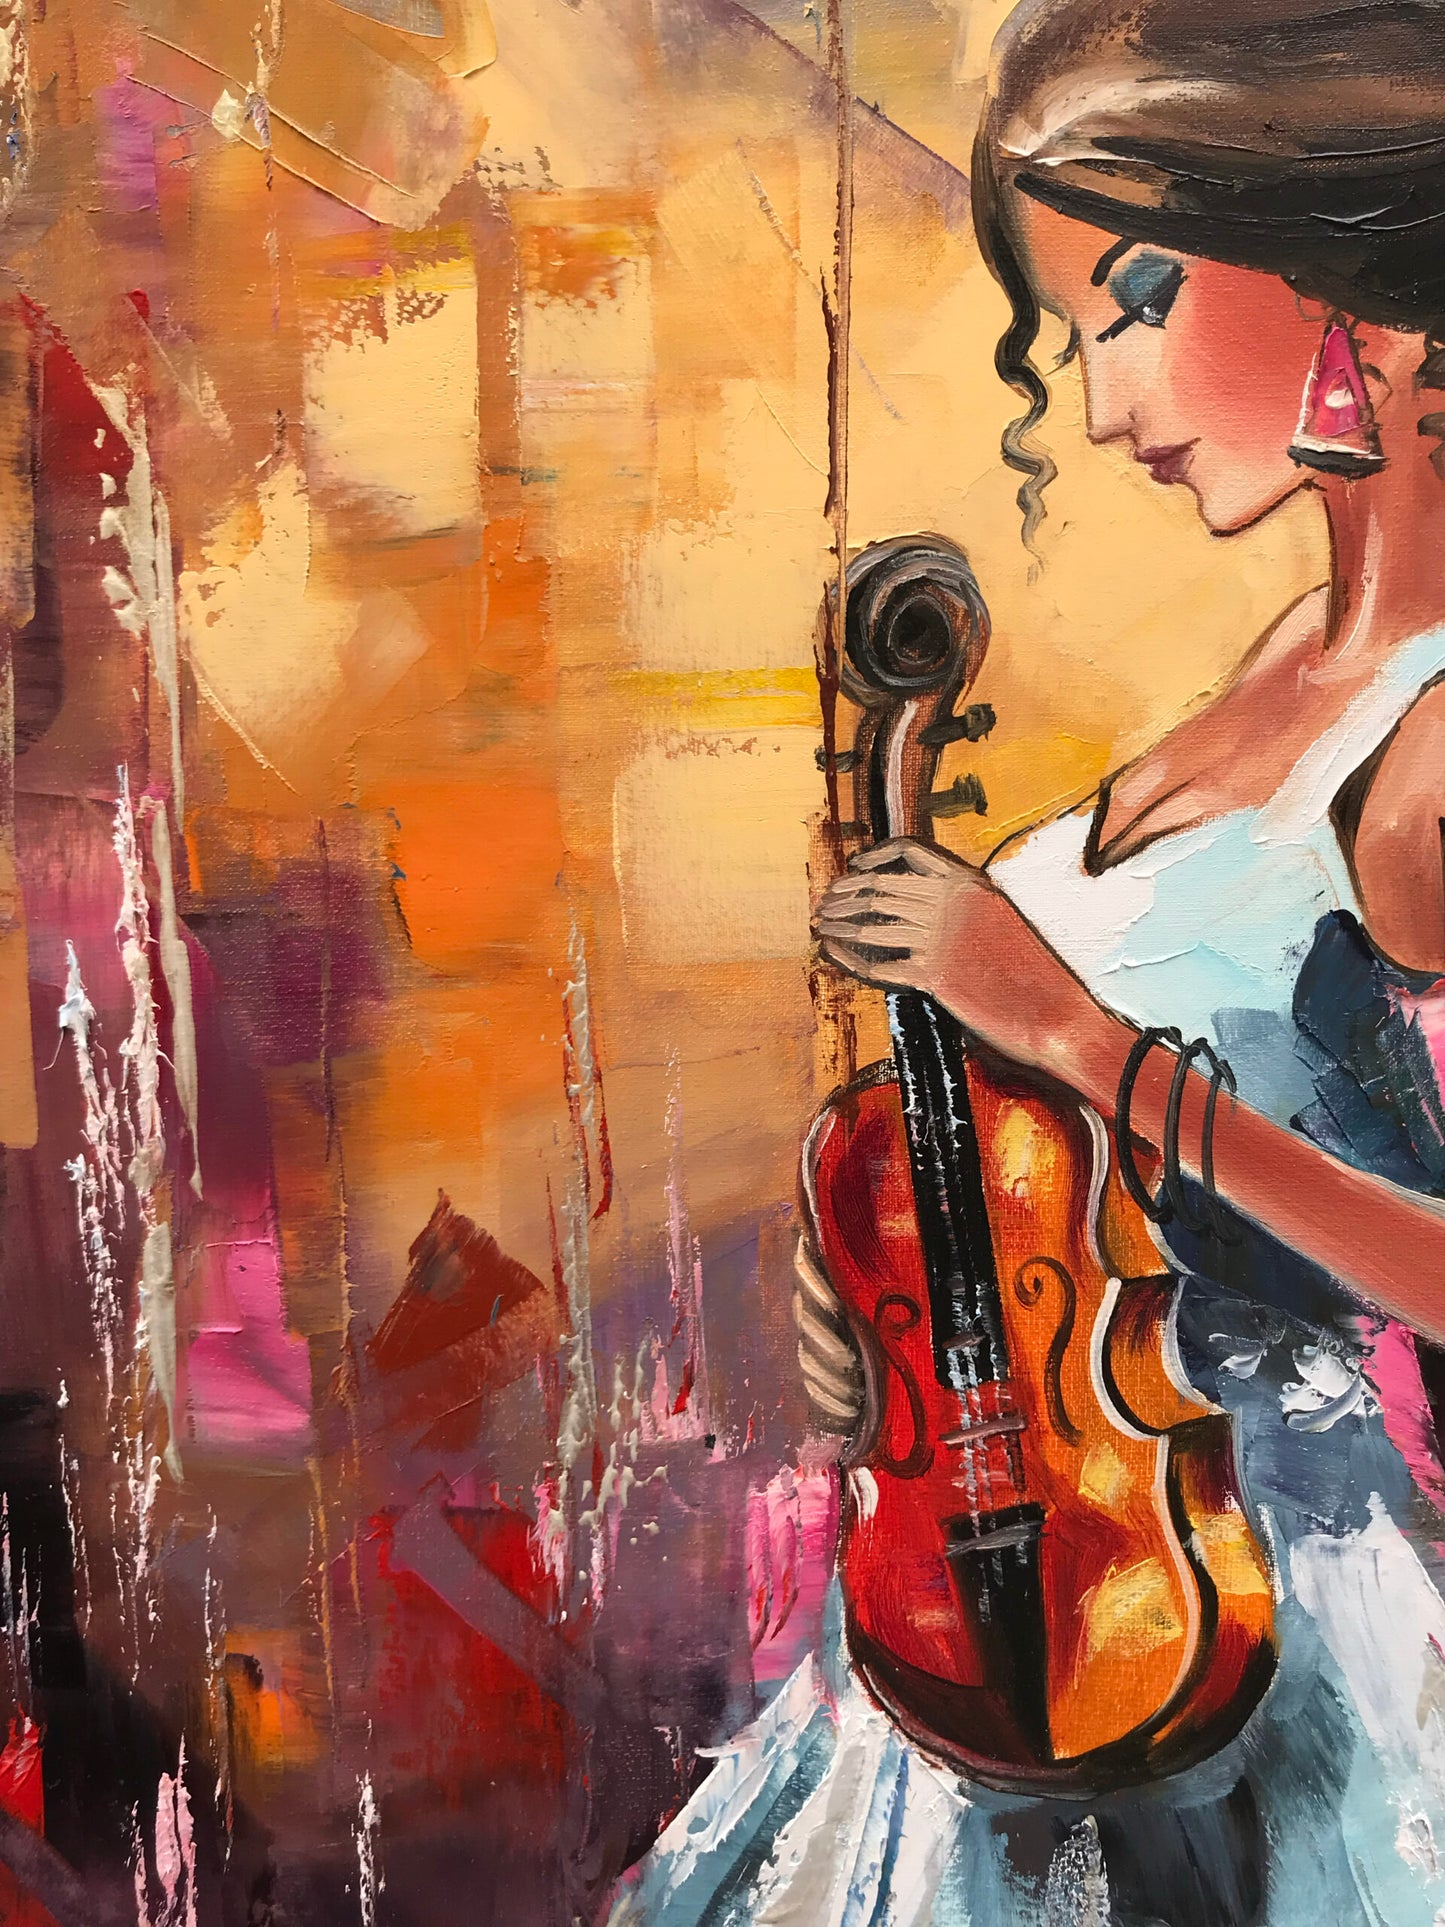 Elegant Lady with Violin Oil Painting Abstract Woman Wall Art Music Art Gift for Her Woman in Blue Dress Painting Oversized Modern Wall Decor Music Art